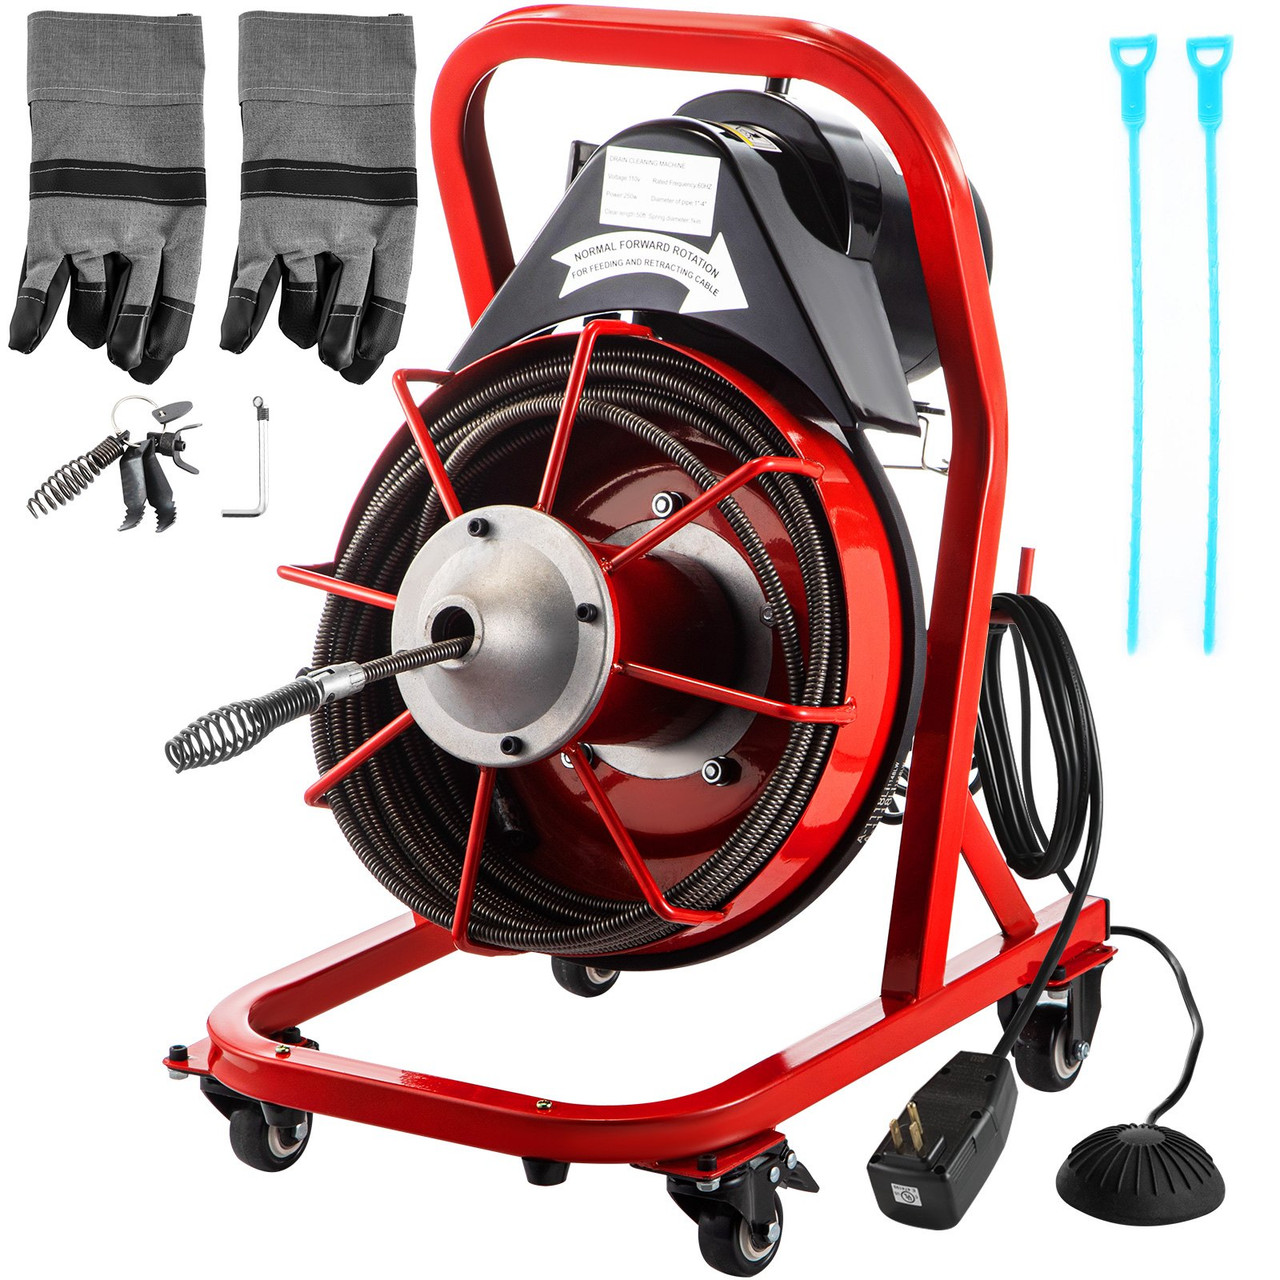 Electric Drain Auger, 50' x 3/8", 250W Sewer Snake Machine Fit 2''- 4'' Pipes, Hair Clog Remover for Bathroom Shower Pipe Drain, Bathtub Hair Clogs, Kitchen Sink Drain Cleaning